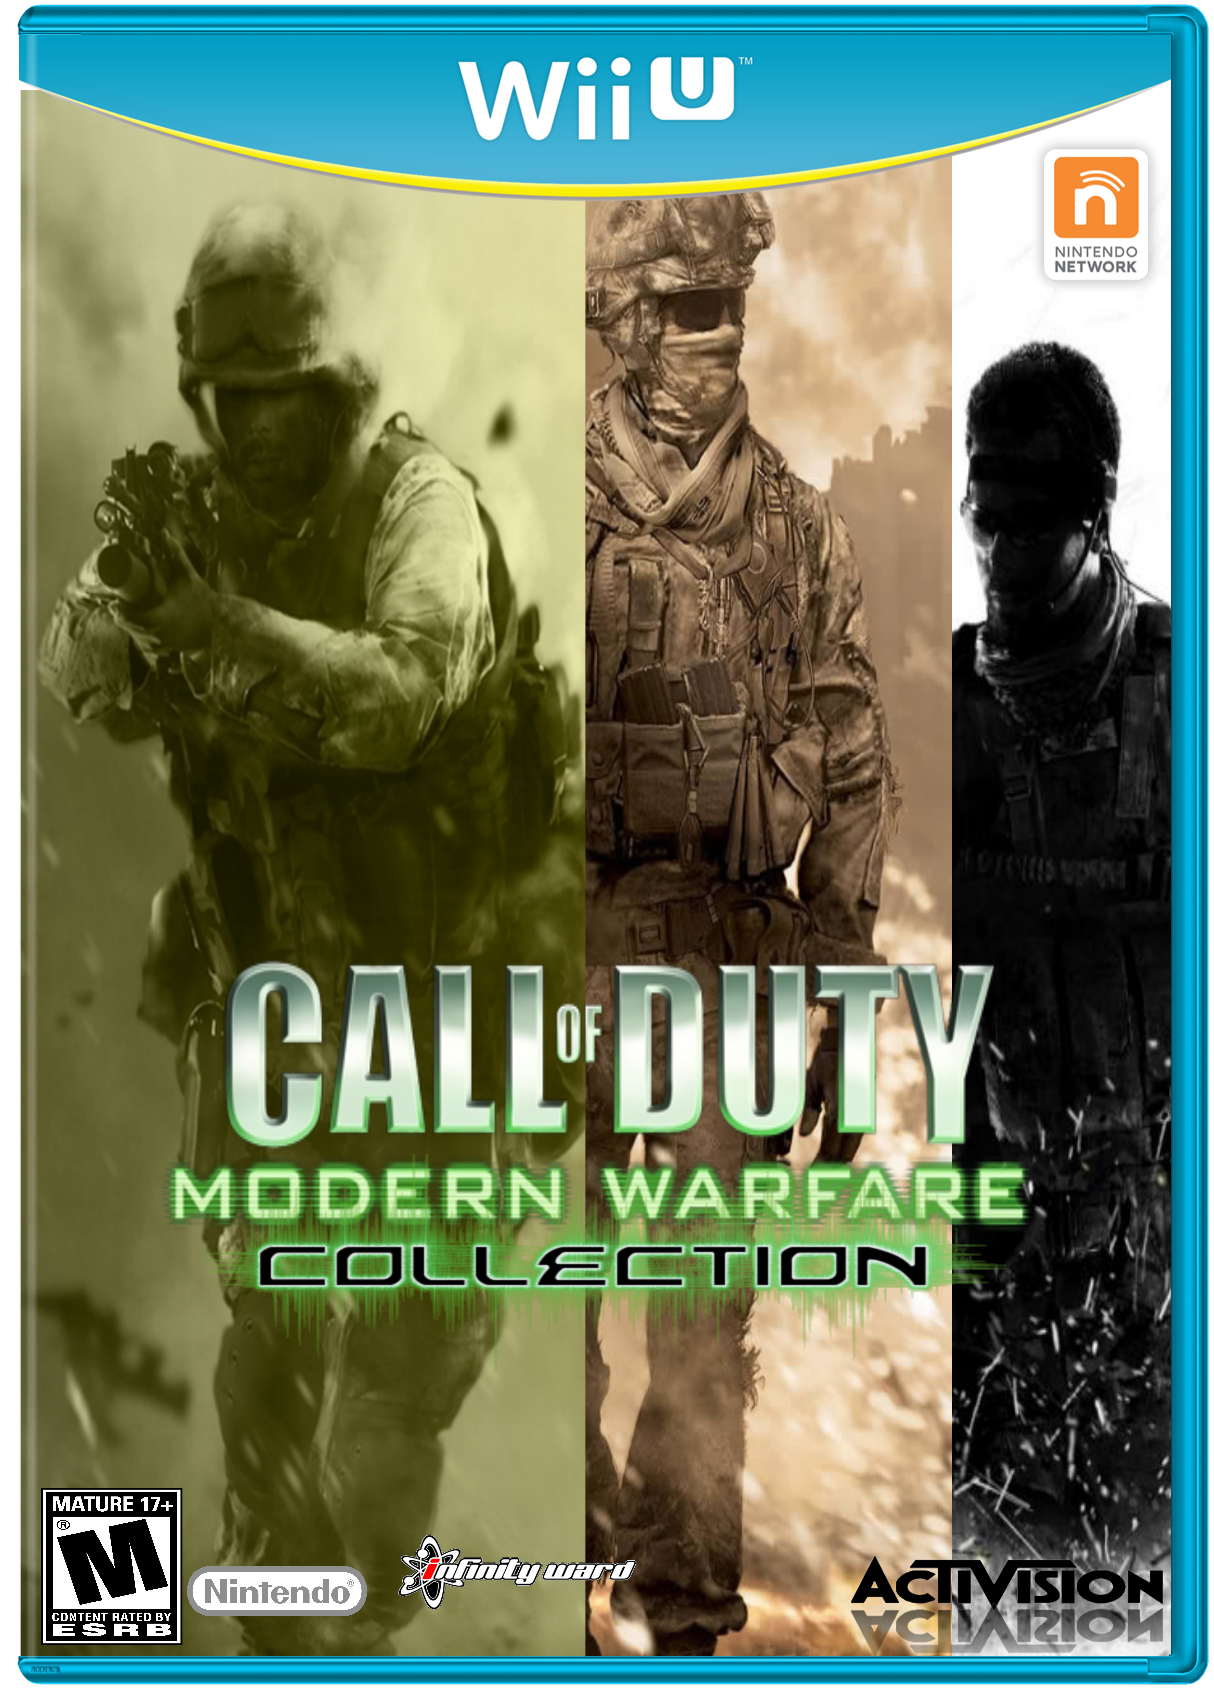 Call of Duty: Modern Warfare Collection box cover